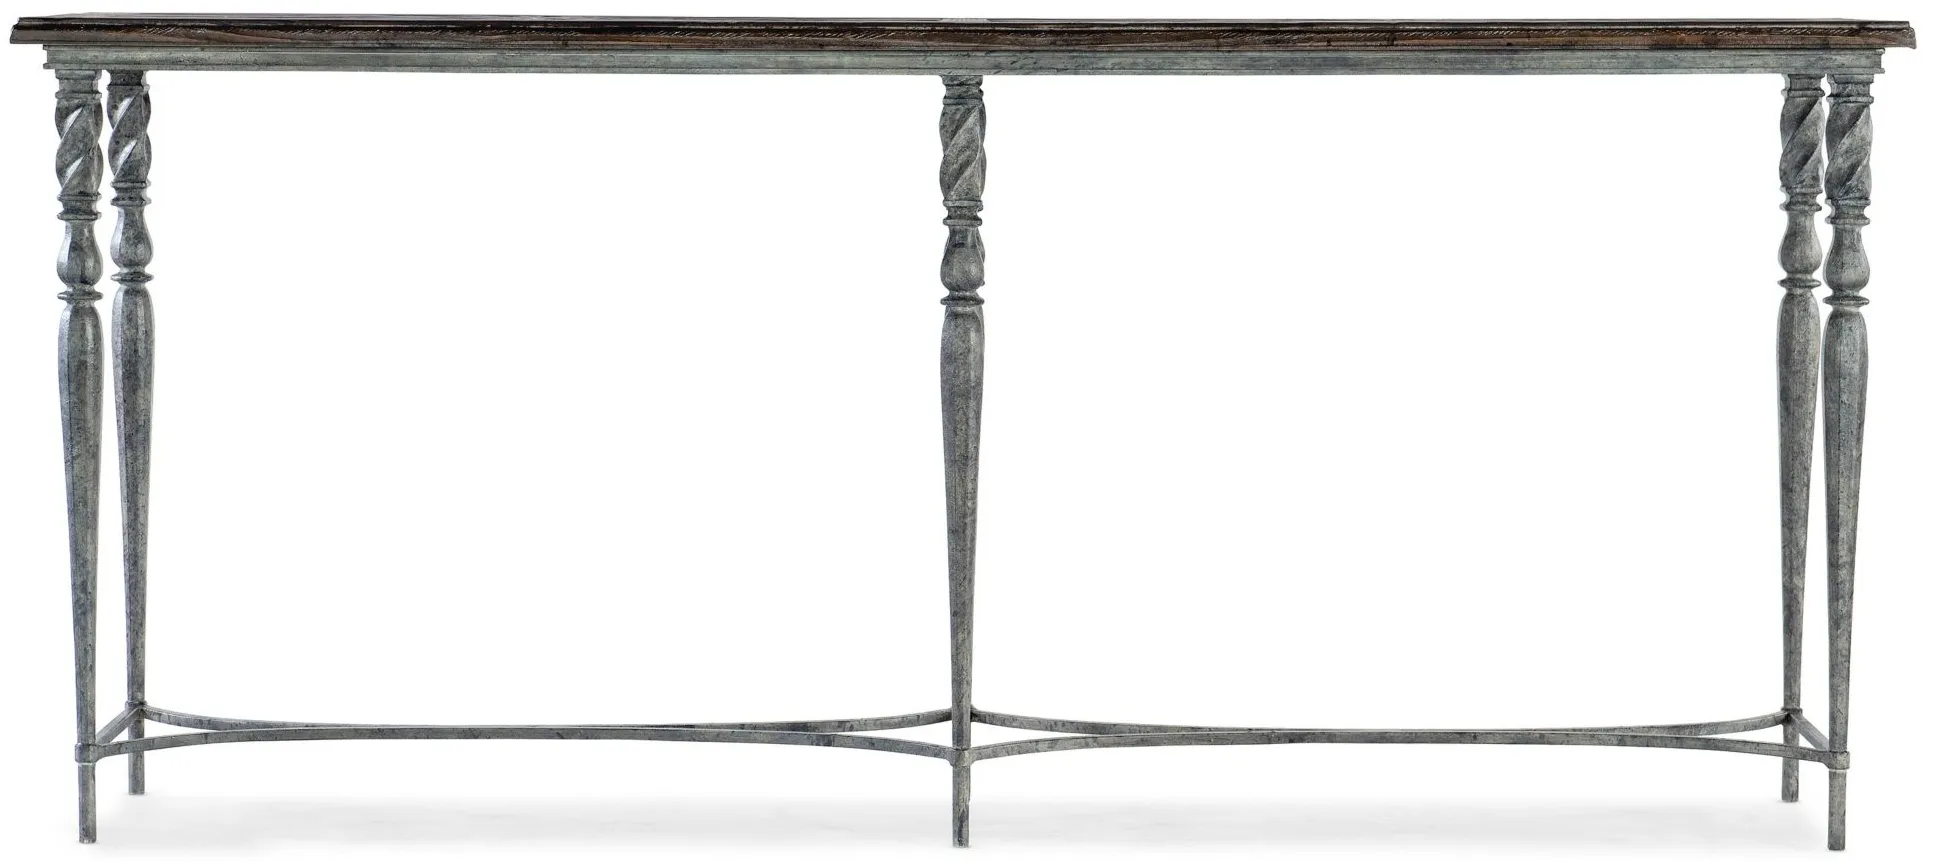 Traditions Console Table in Maduro by Hooker Furniture